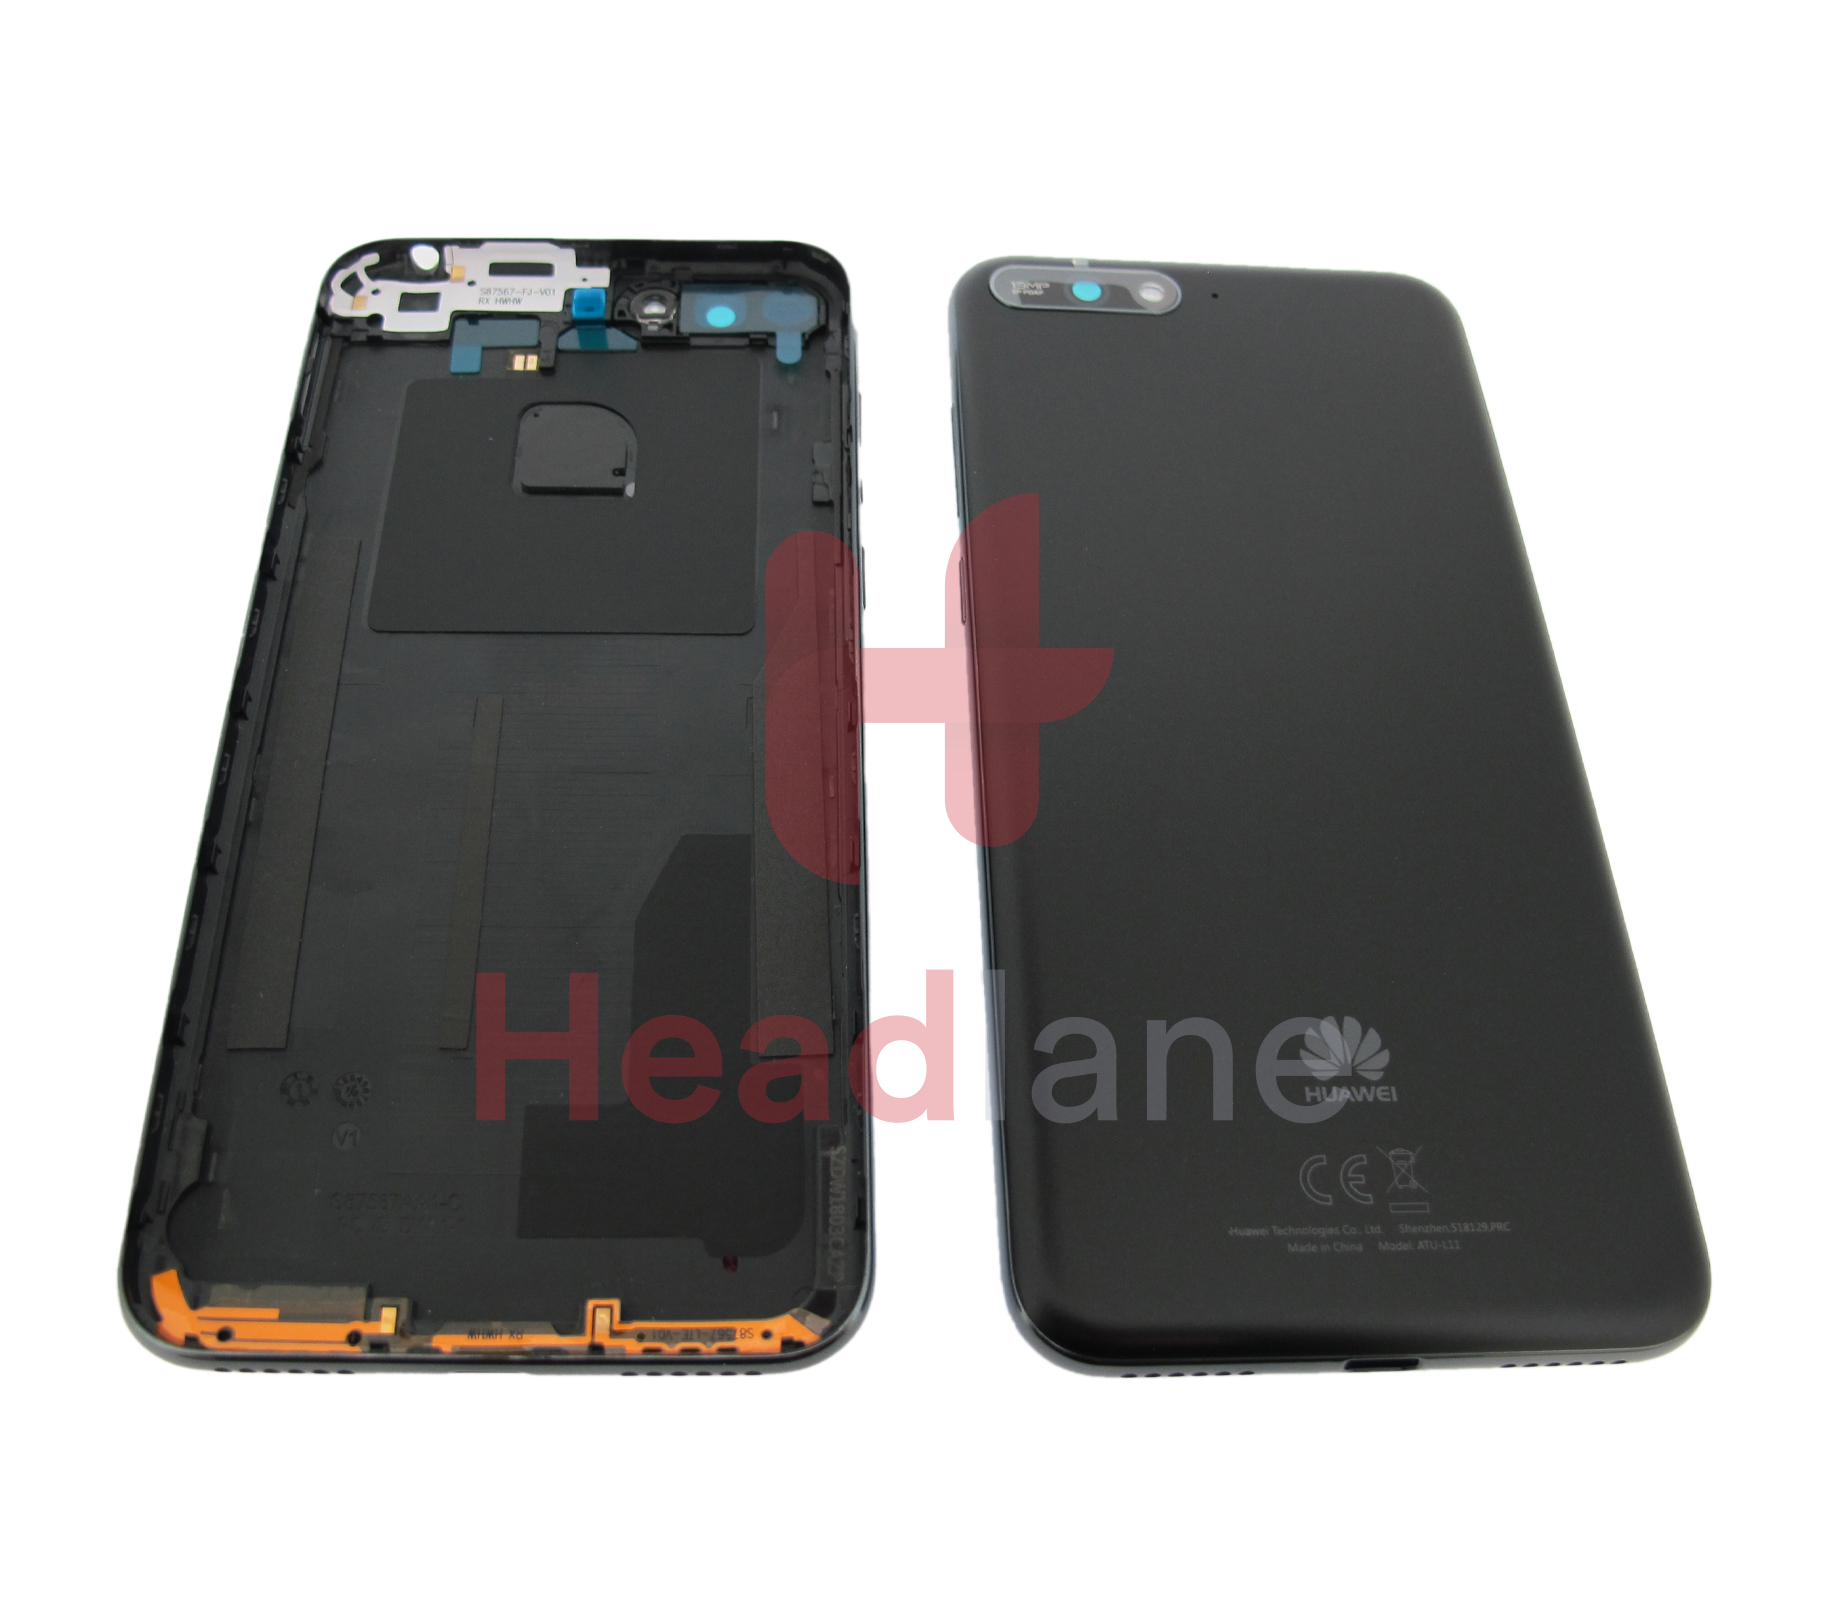 Huawei Y6 (2018) Back / Battery Cover - Black